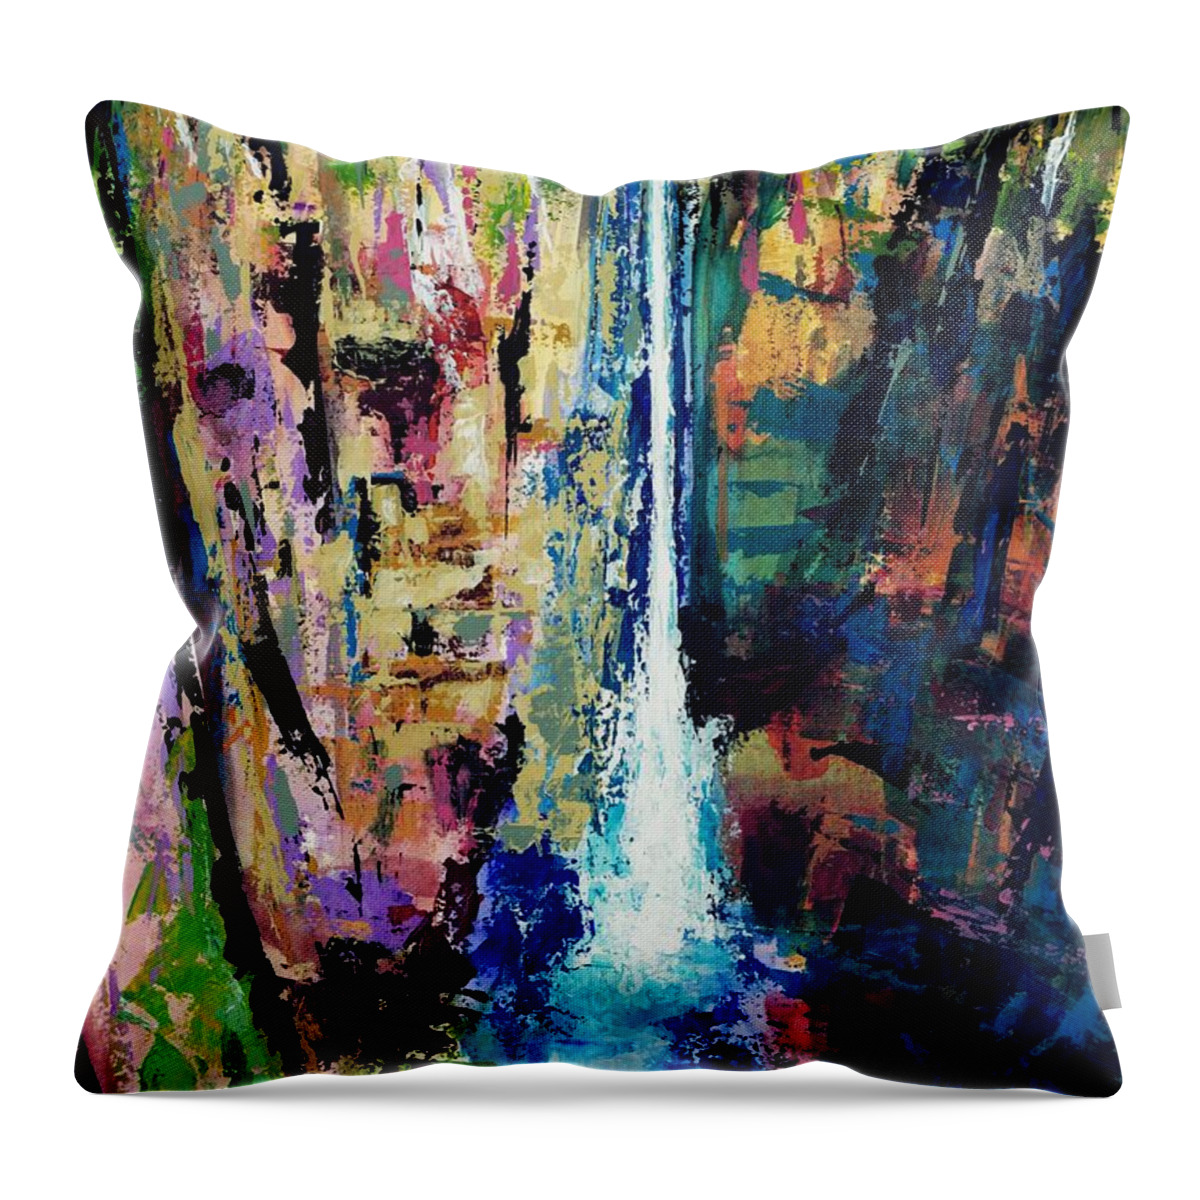 Waterfalls Throw Pillow featuring the painting Water Falls #2 by Frances Marino